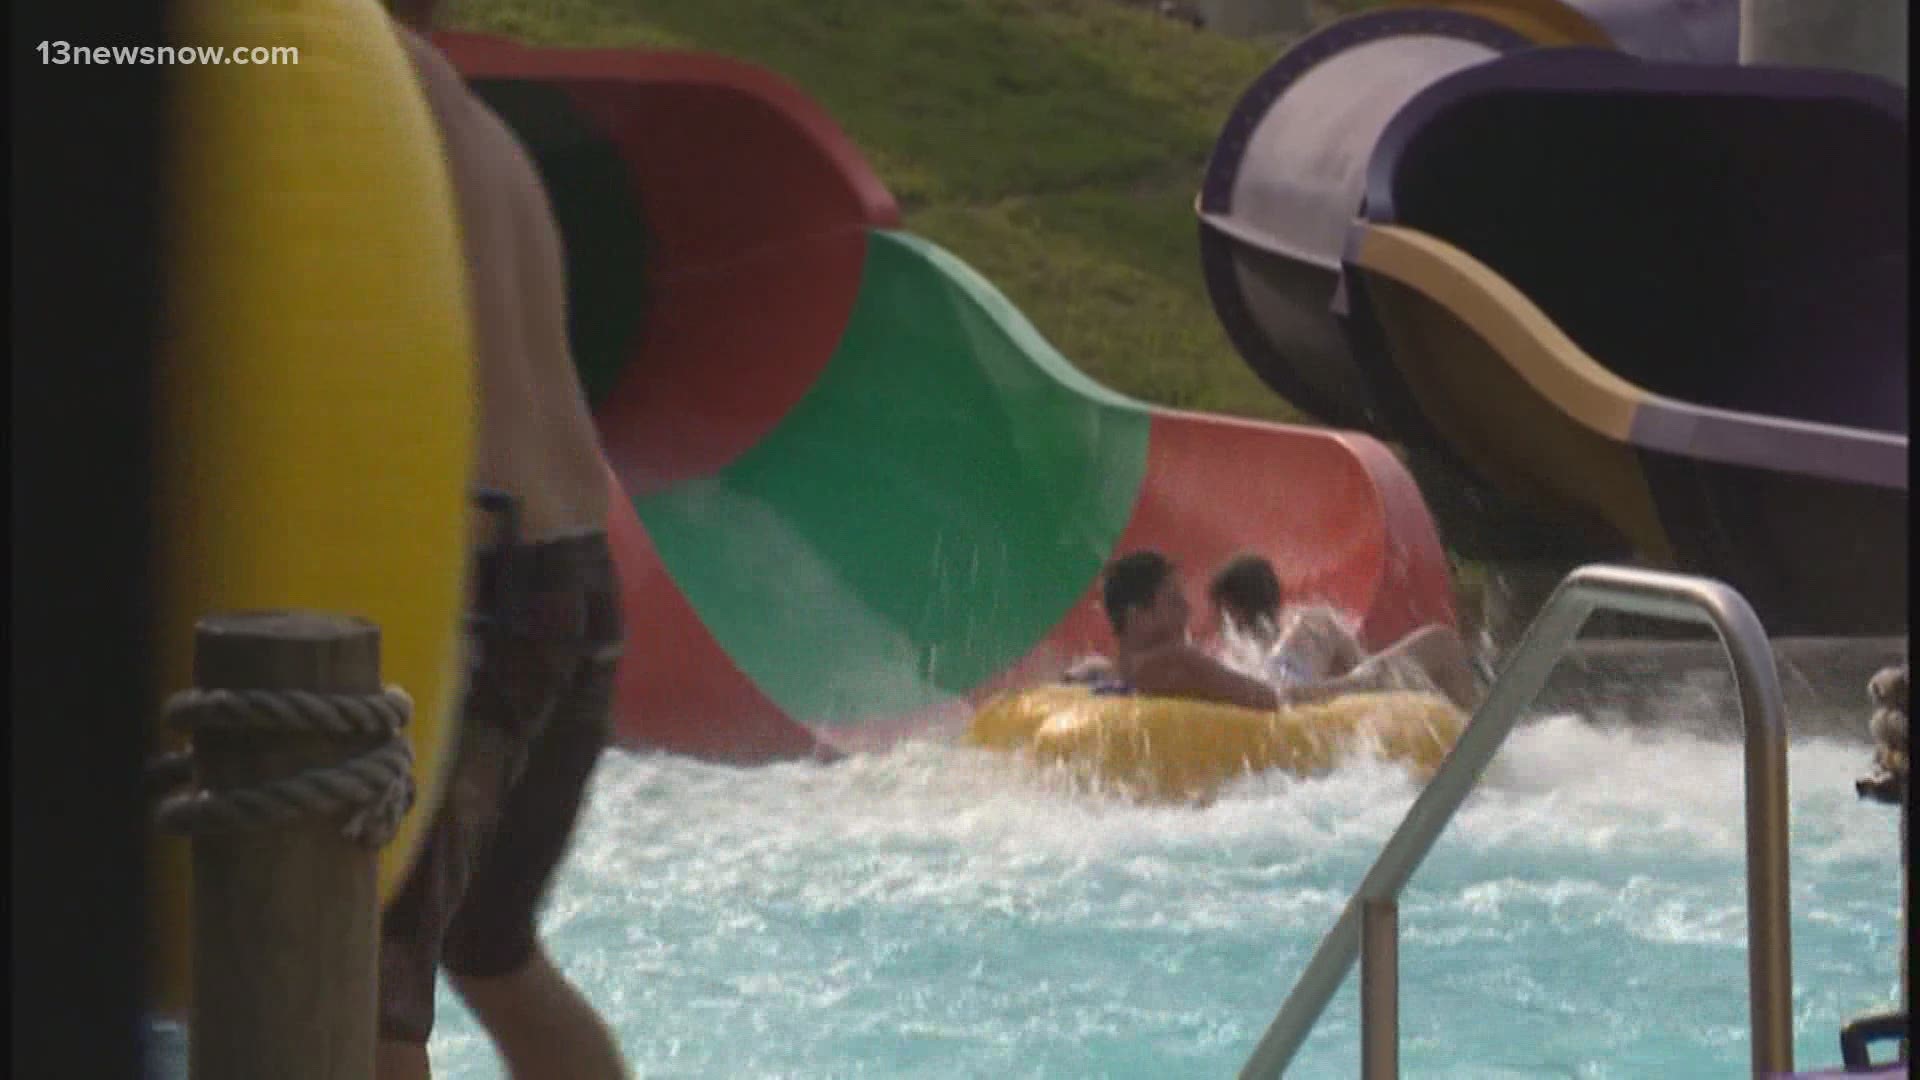 Two local water parks will open for the summer season on May 22.